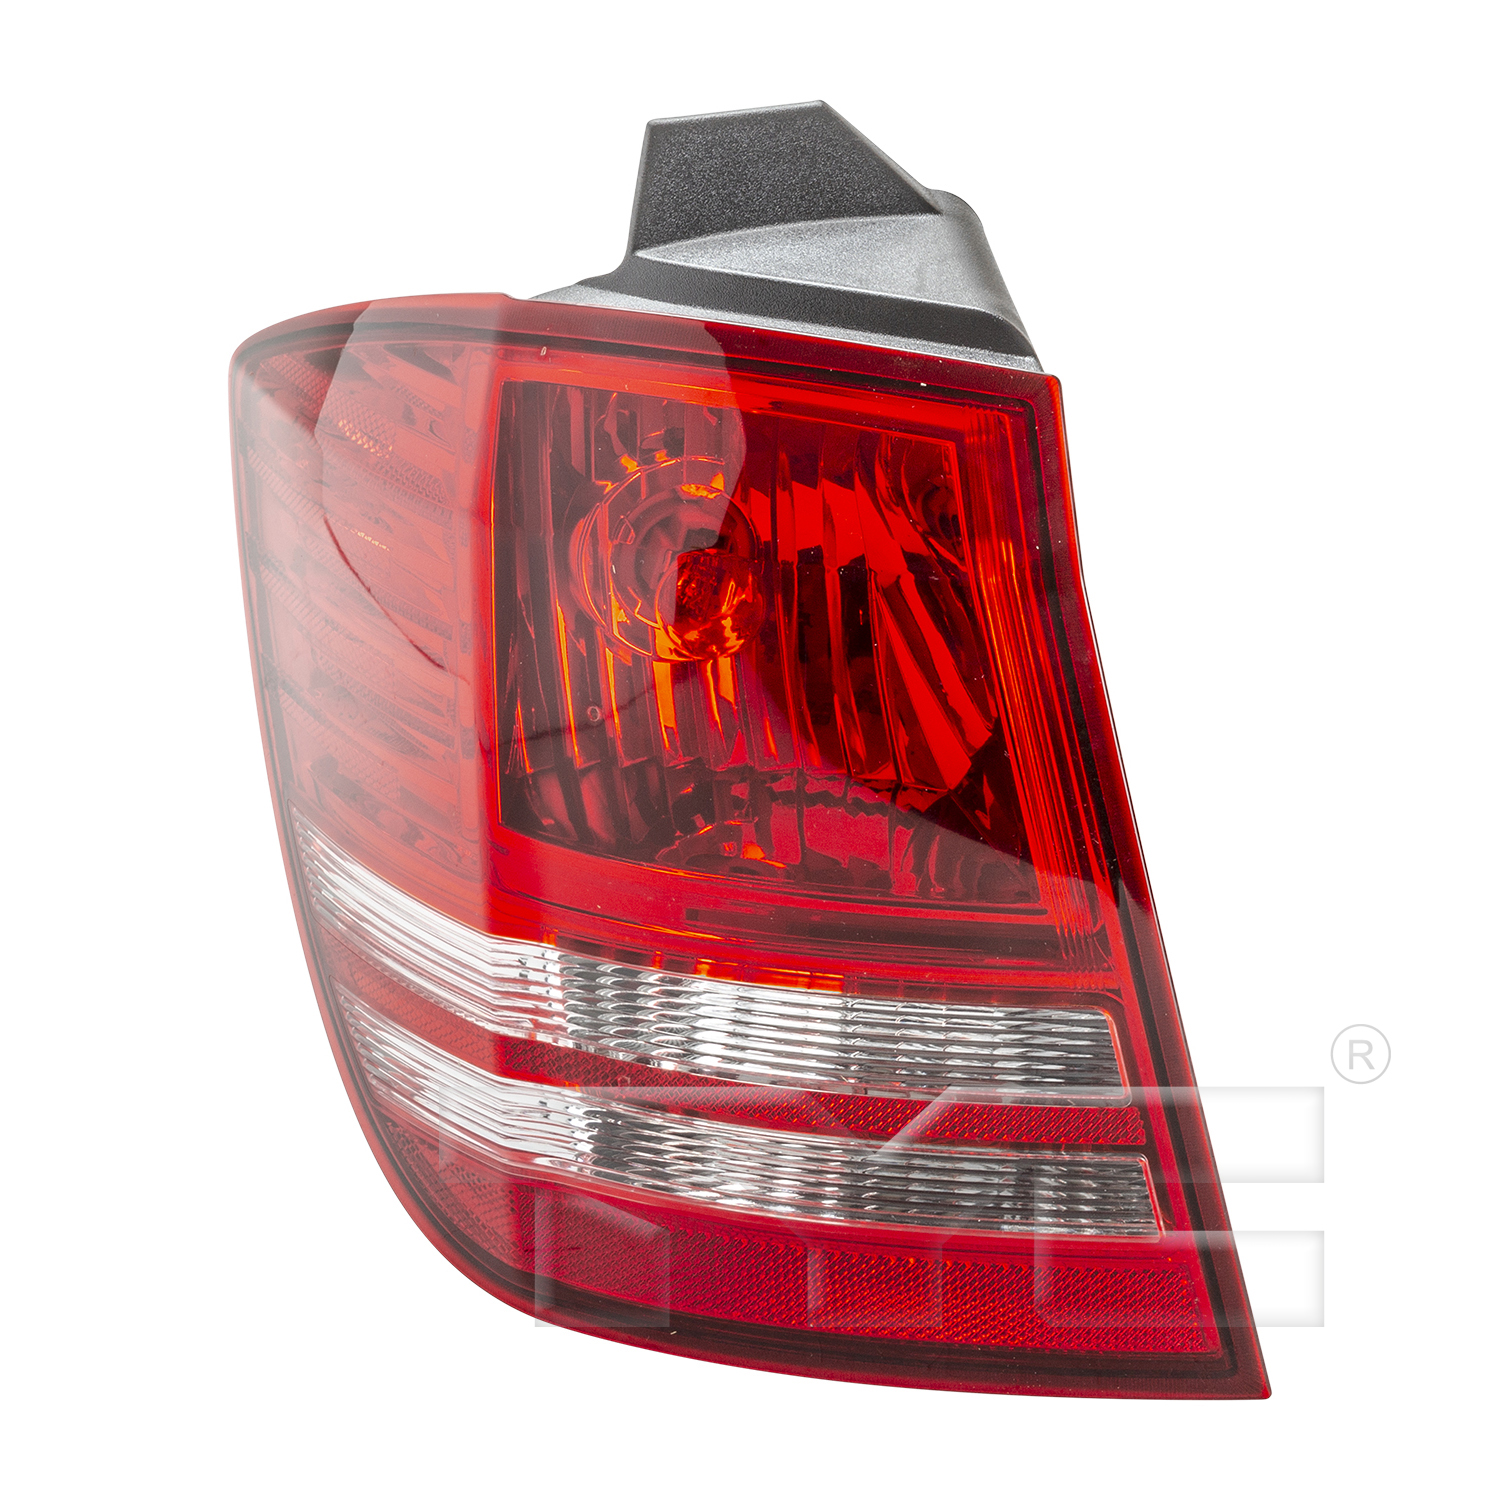 Aftermarket TAILLIGHTS for DODGE - JOURNEY, JOURNEY,10-20,LT Taillamp assy outer